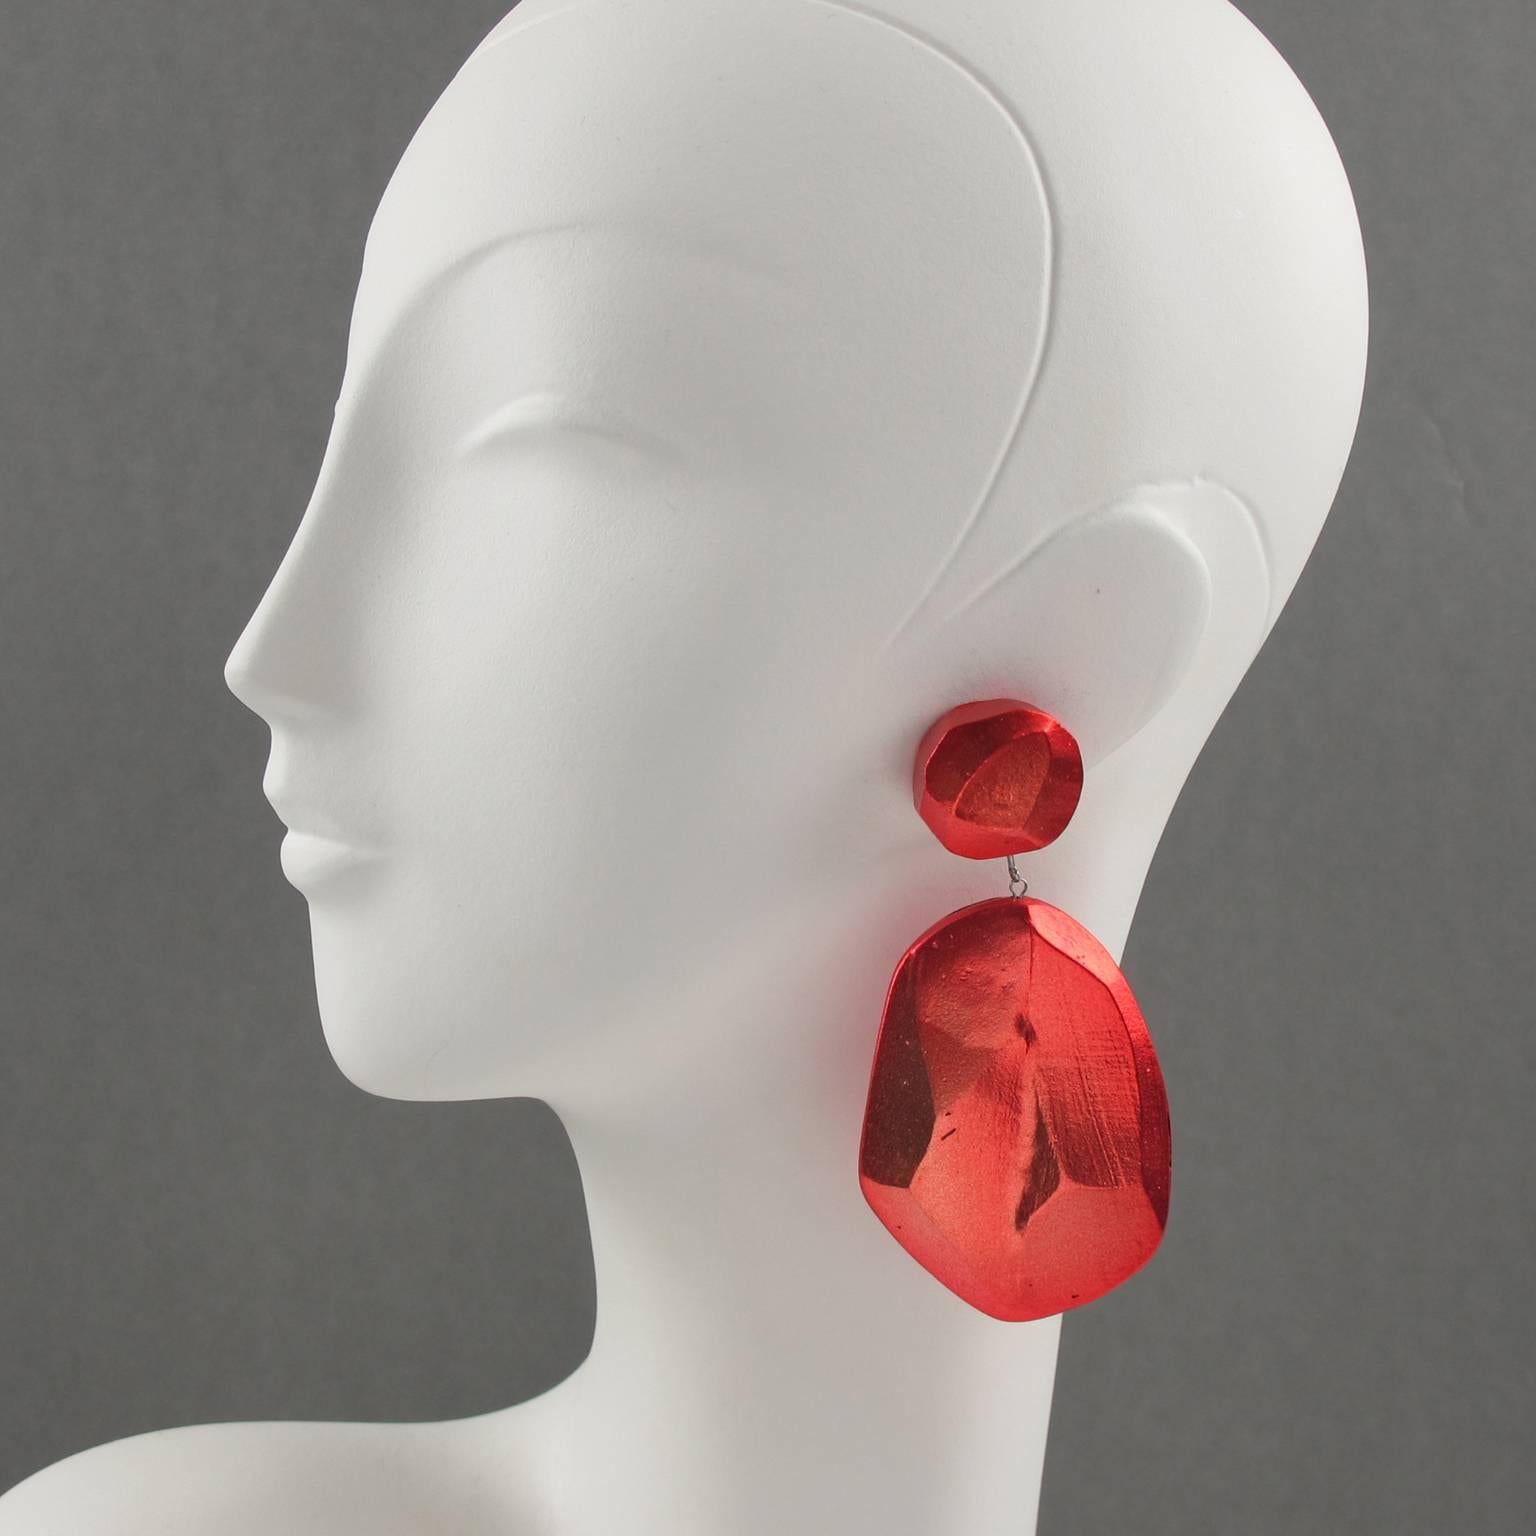 Sophisticated oversized clip on earrings, by Mary Oros, circa 1980s. Featuring large organic feel dangling shape in cast resin with incredible red/pink metallic paint color. Signed at the back with engraved 